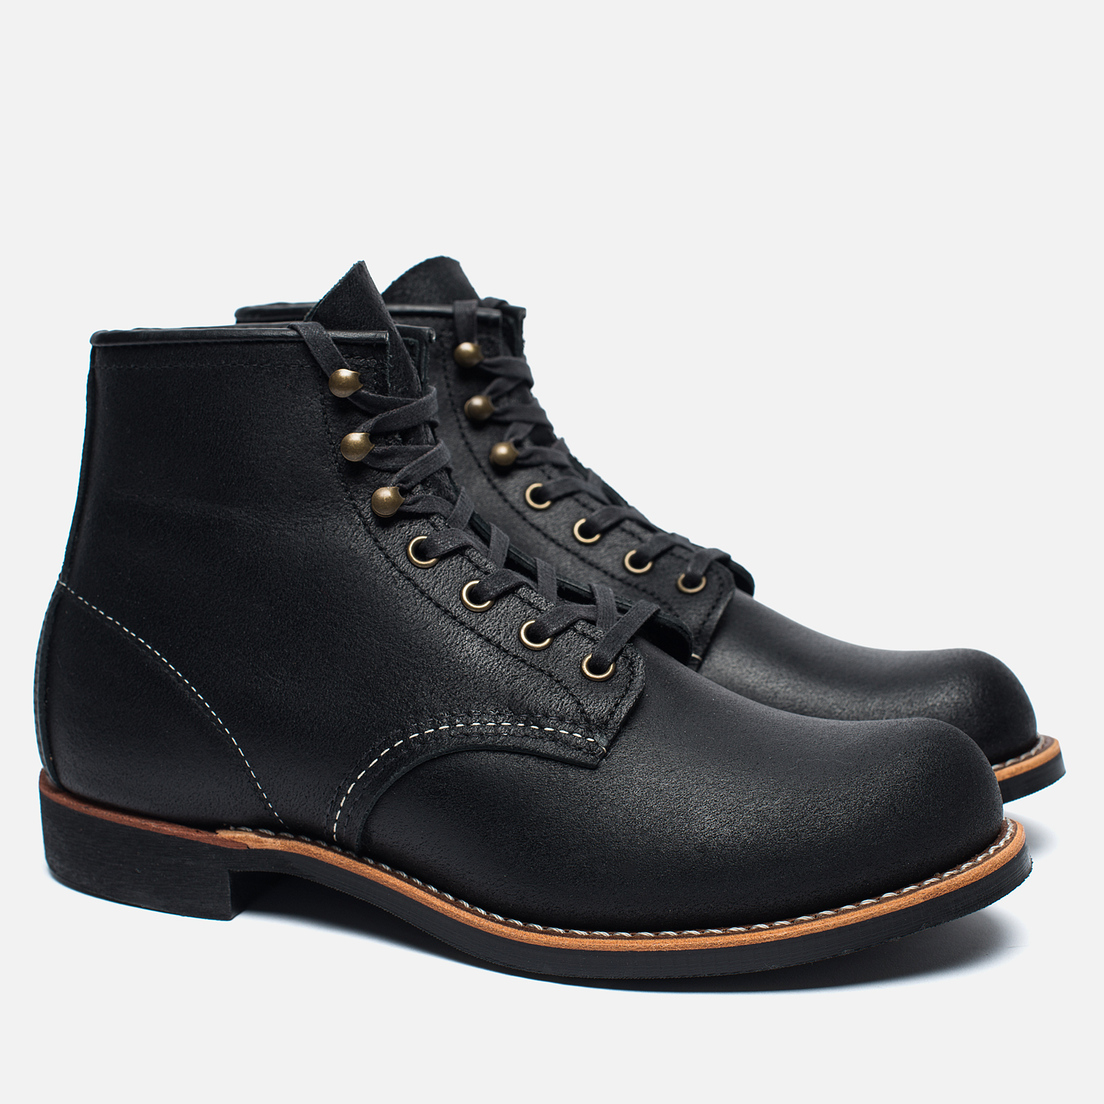 Red Wing Shoes Мужские ботинки 2955 Blacksmith Spitfire Leather